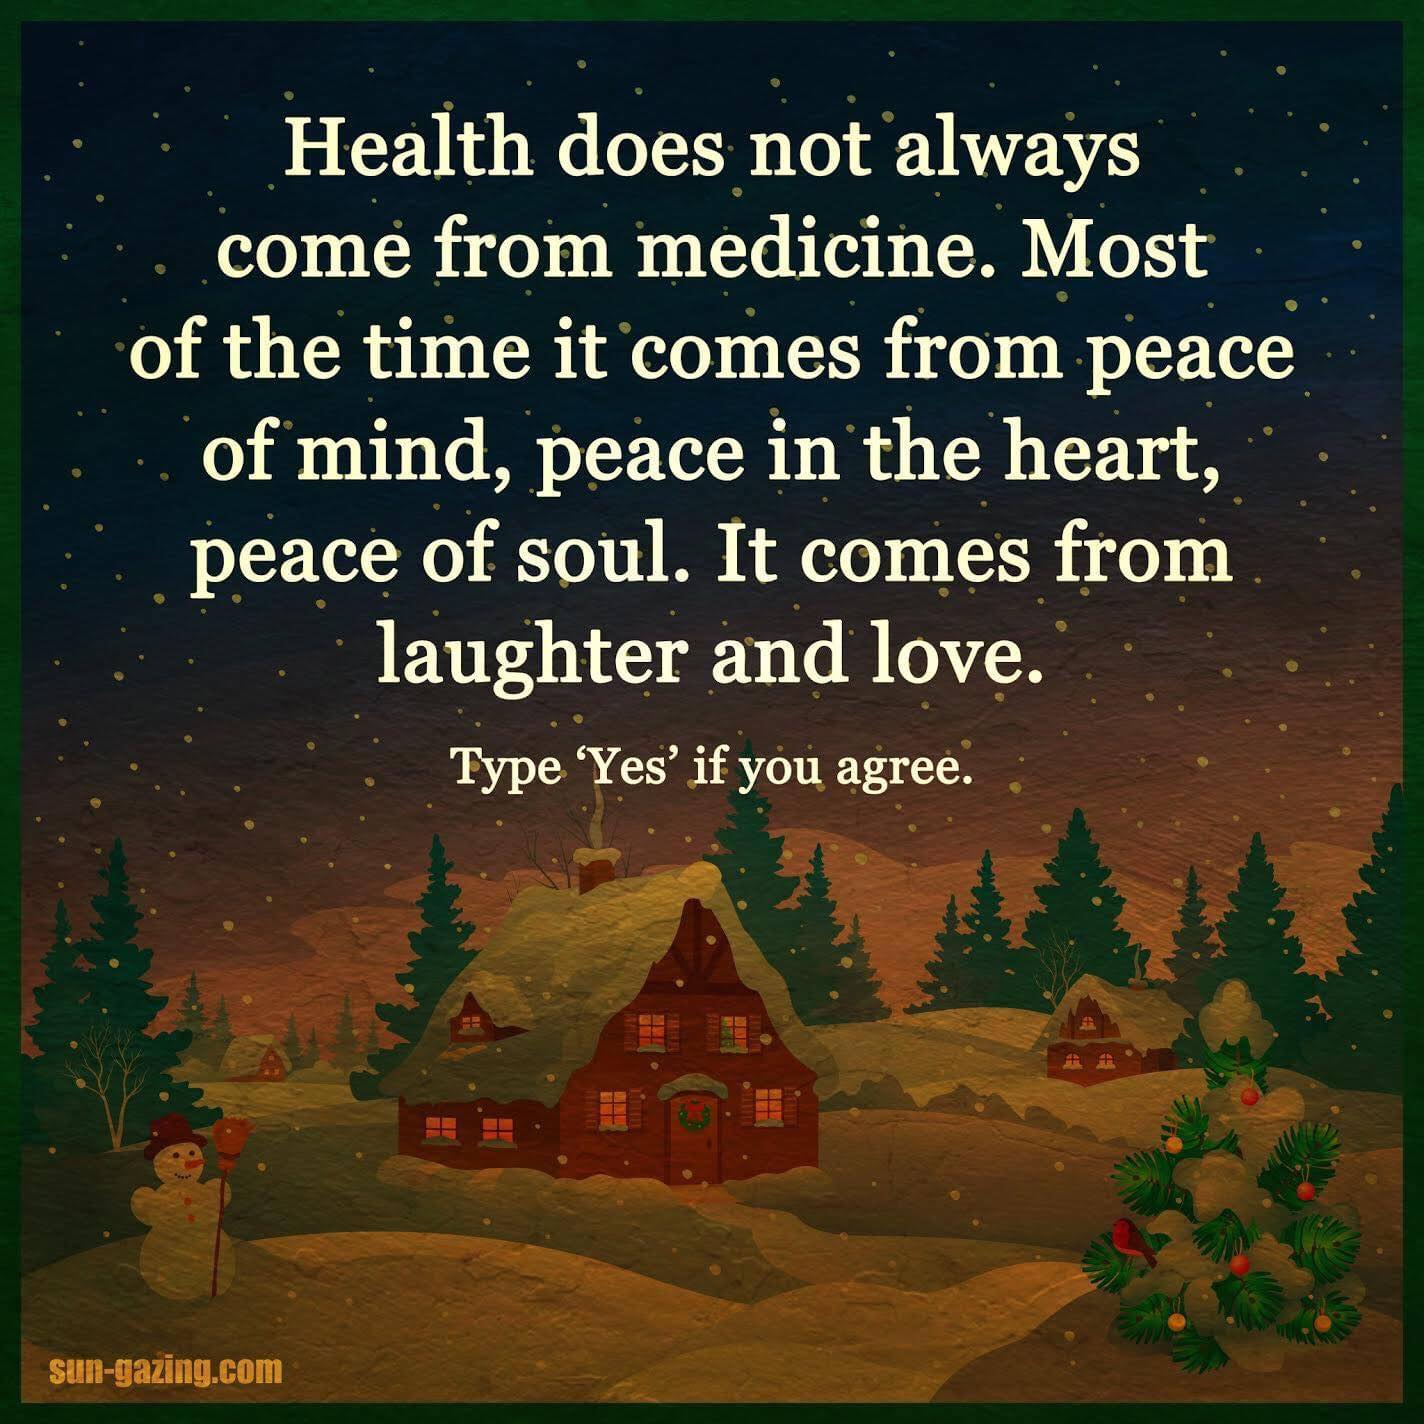 health does not always come from medicine, most of the time it comes from peace of mind, peace in the heart, peace of soul, it comes from laughter and love